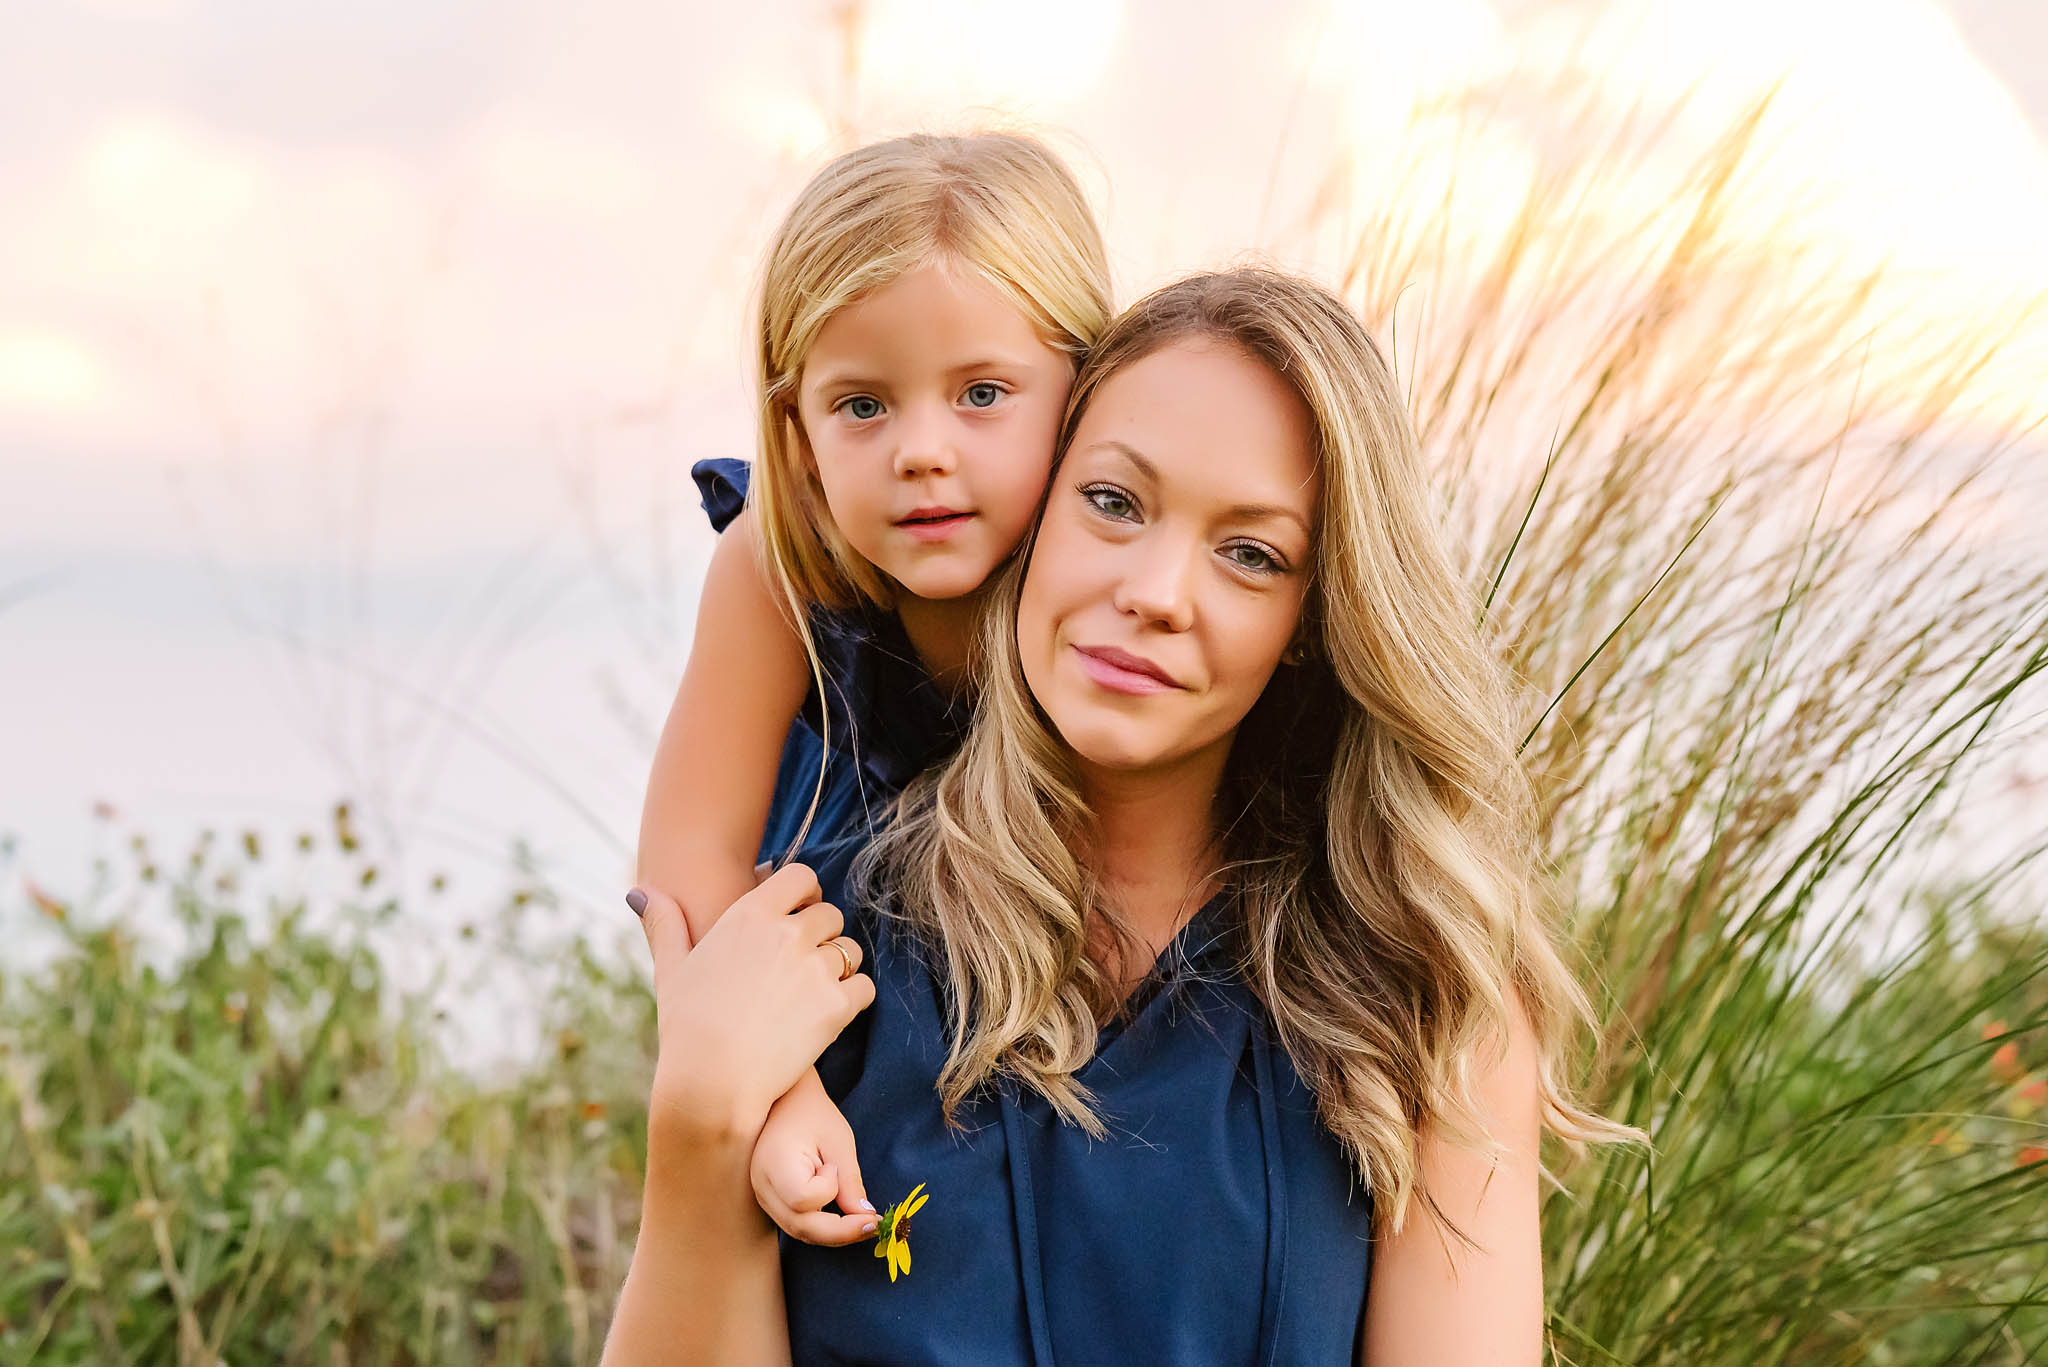 Gorgeous mom and daughter look into camera softly wearing blue and holding flowers